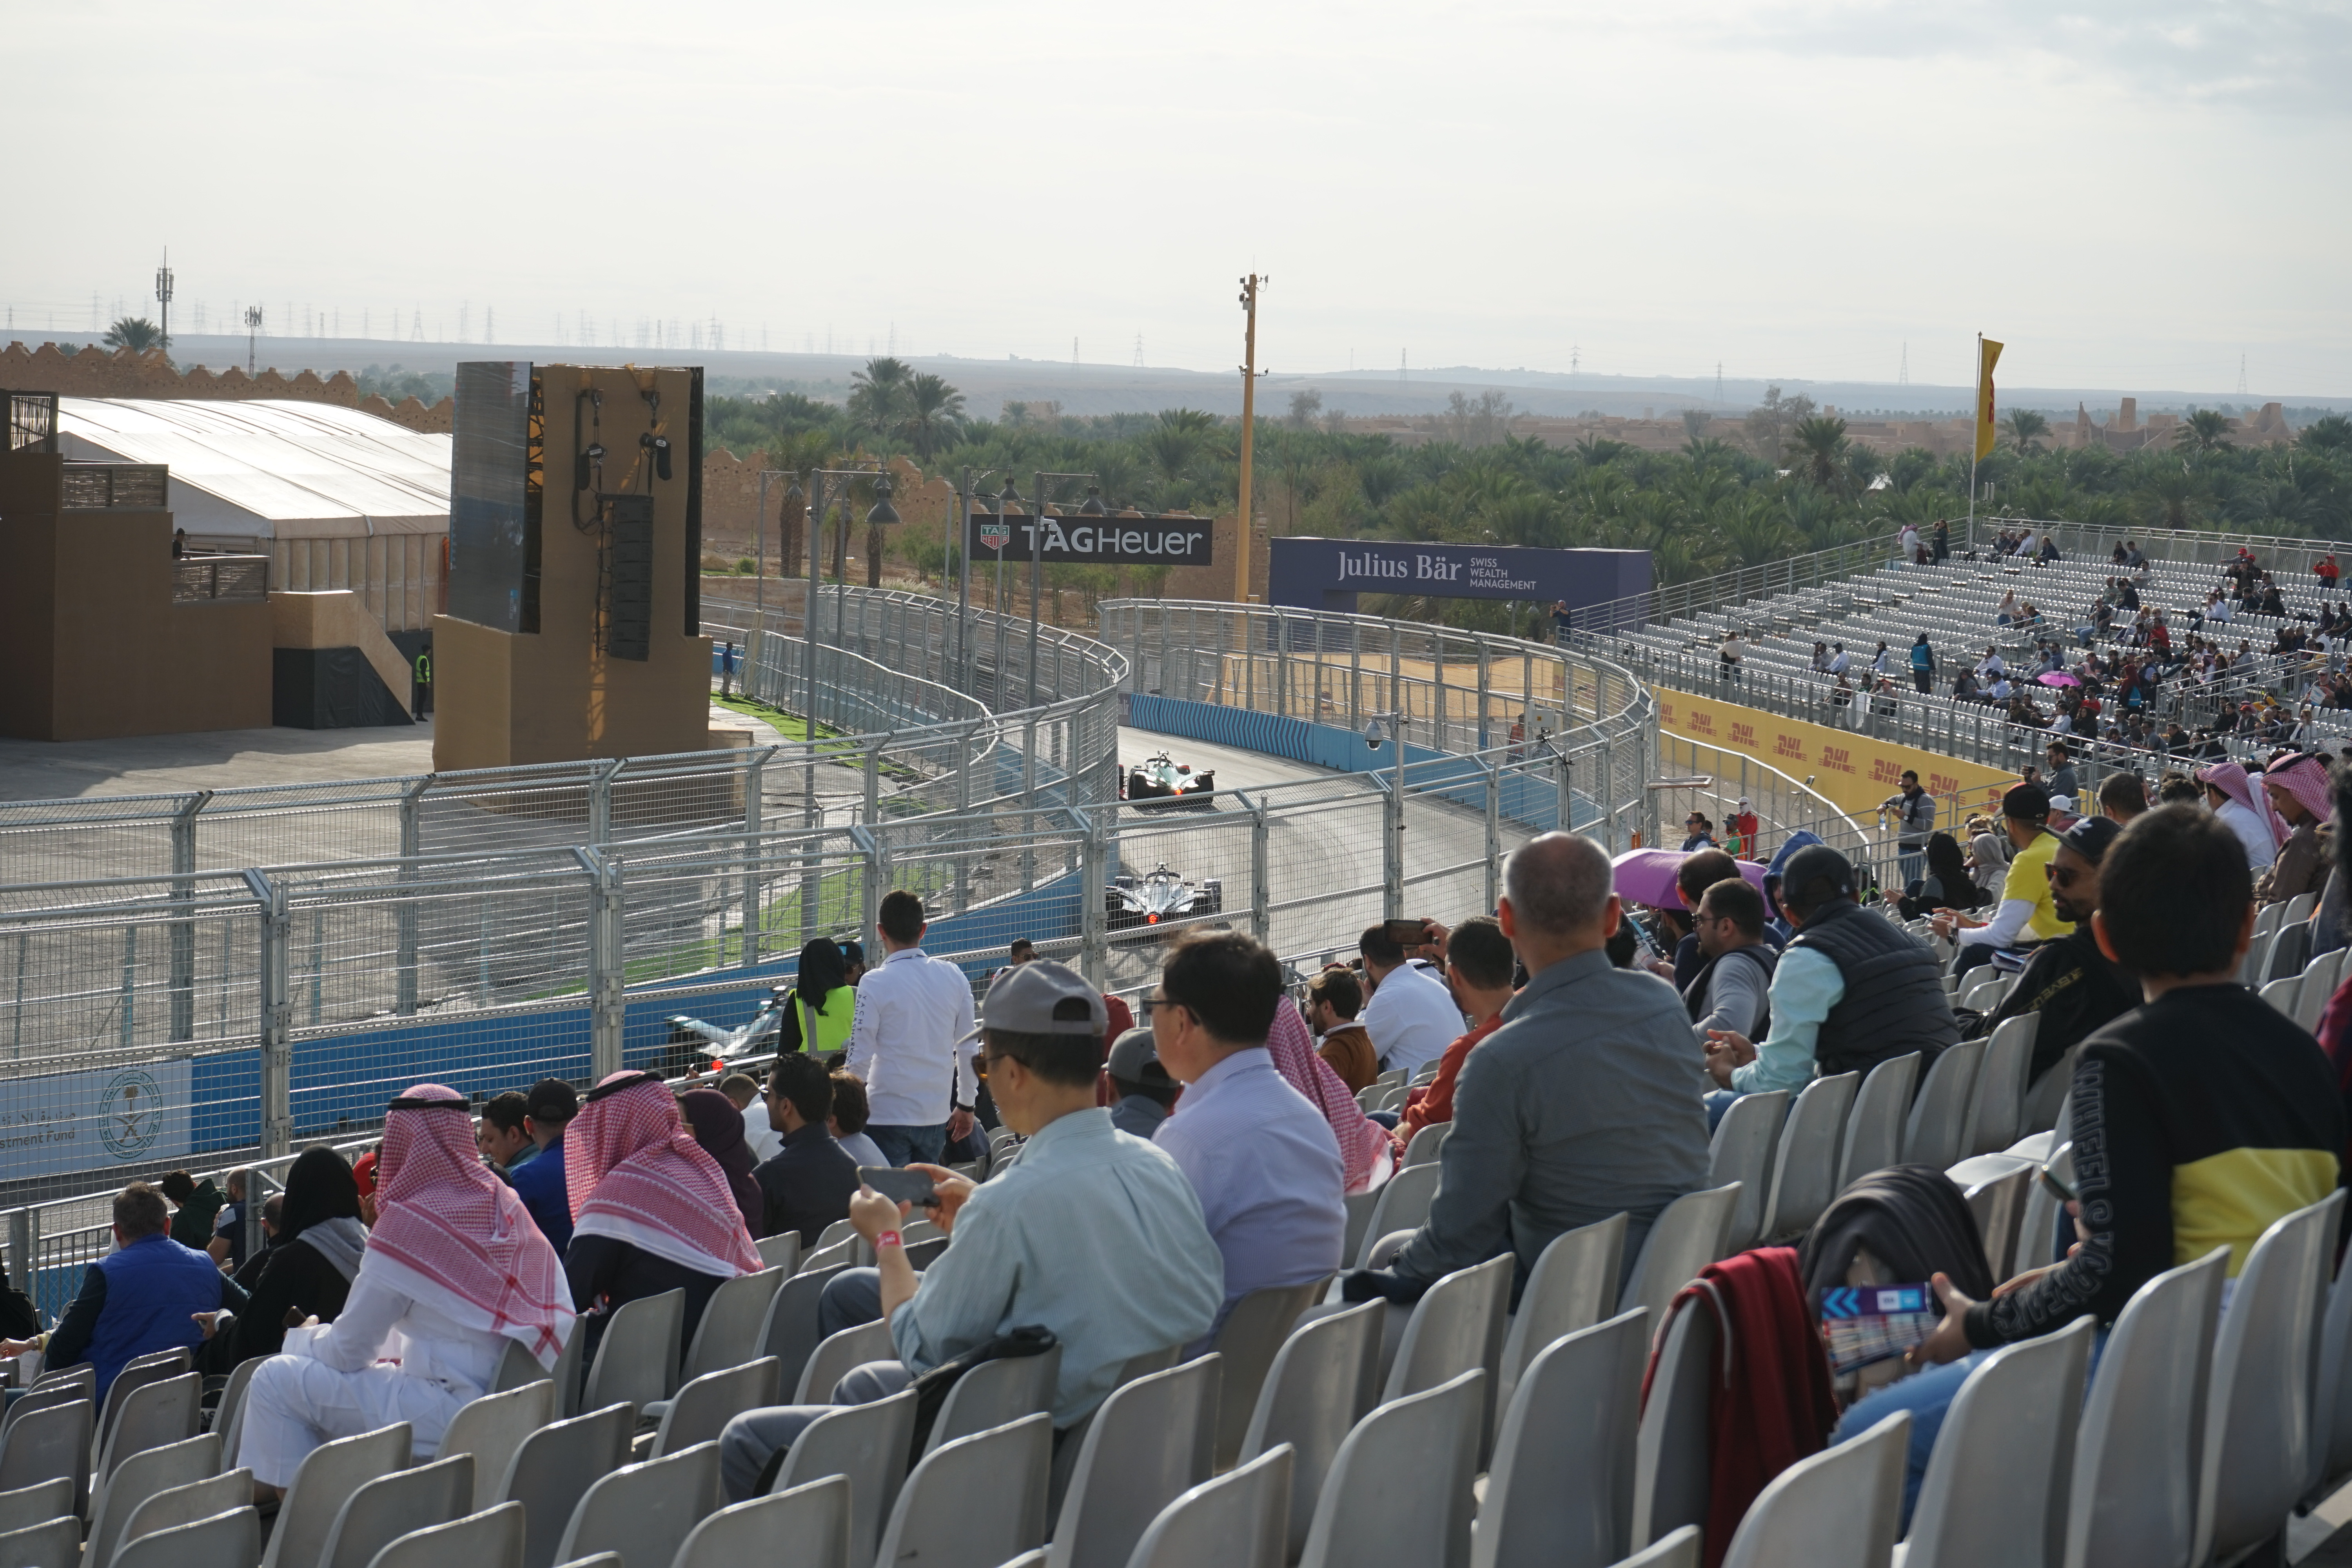 The sixth season of all-electric race series, Formula E, opened on the 22nd-23rd of November in Saudi Arabia